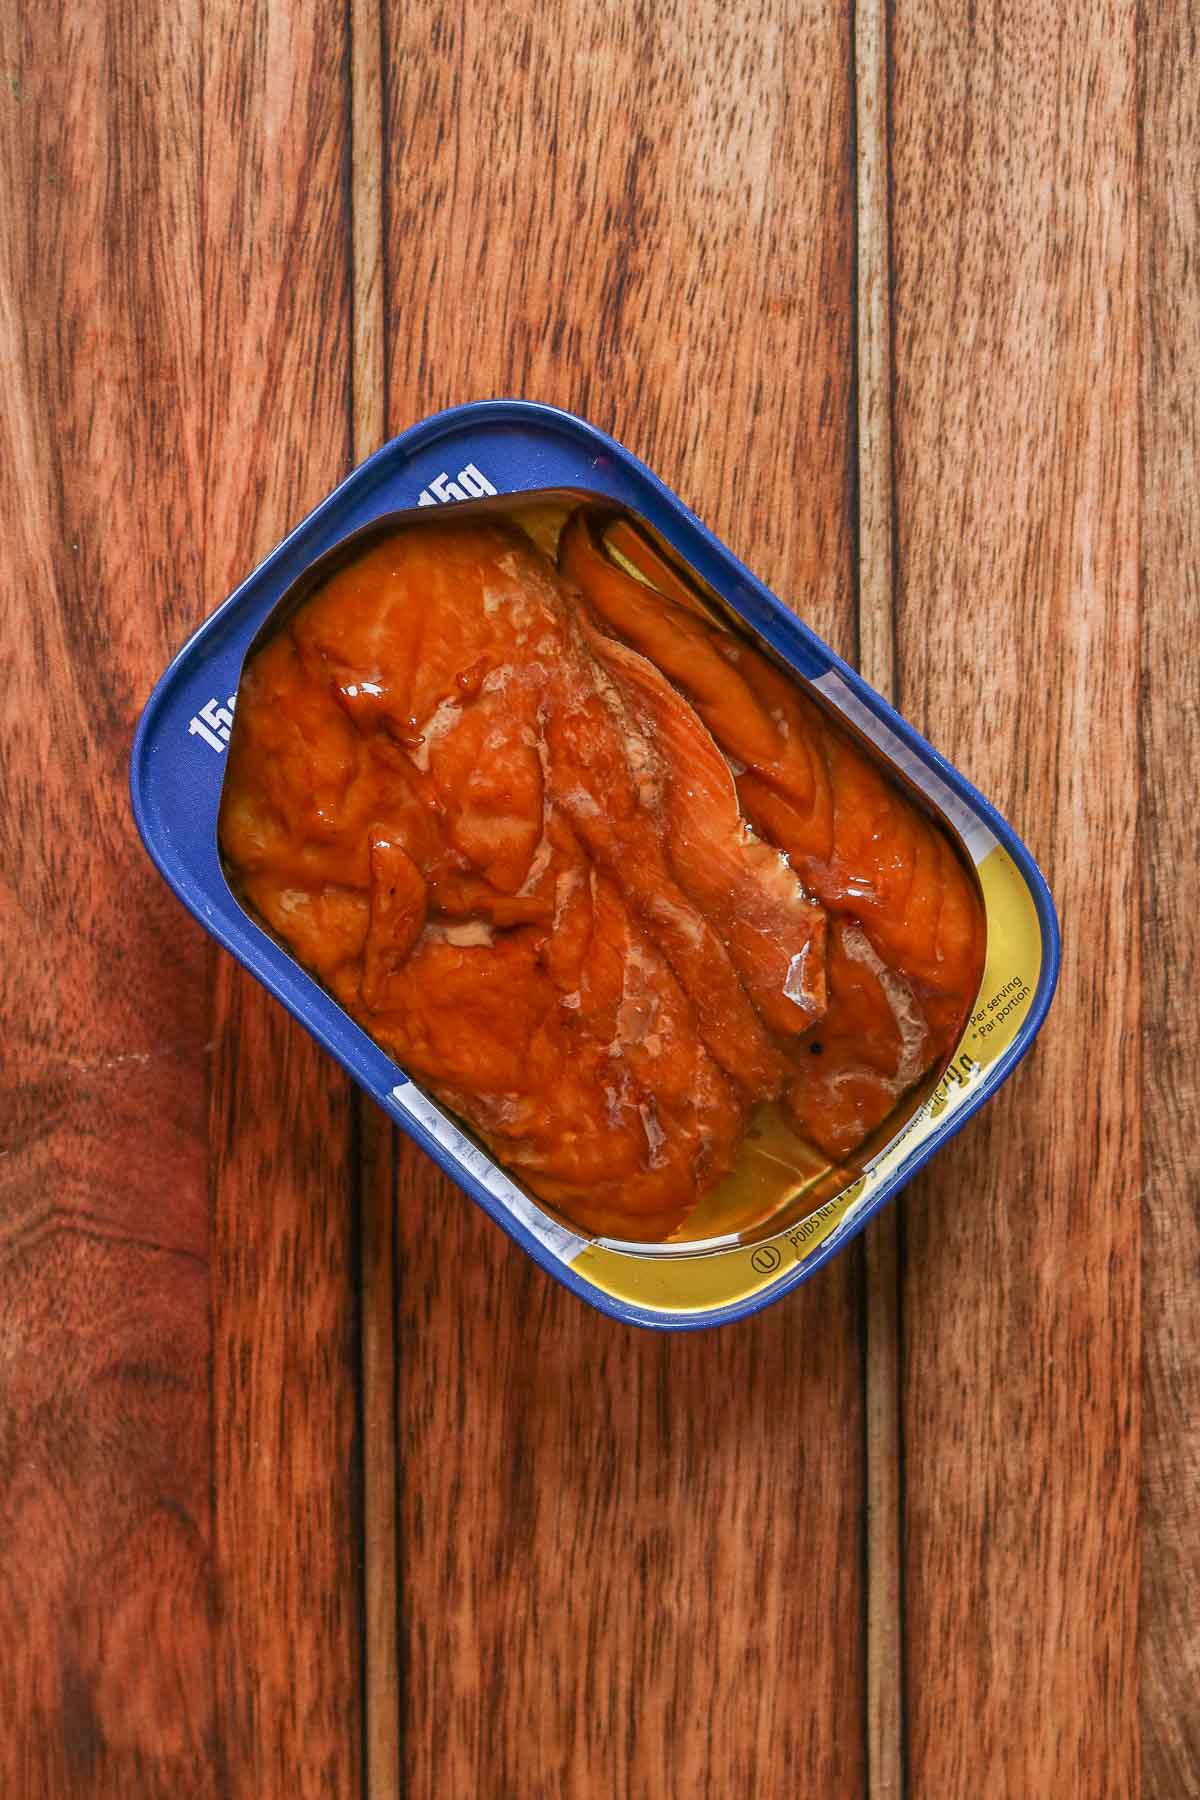 Can of smoked mackerel in oil.